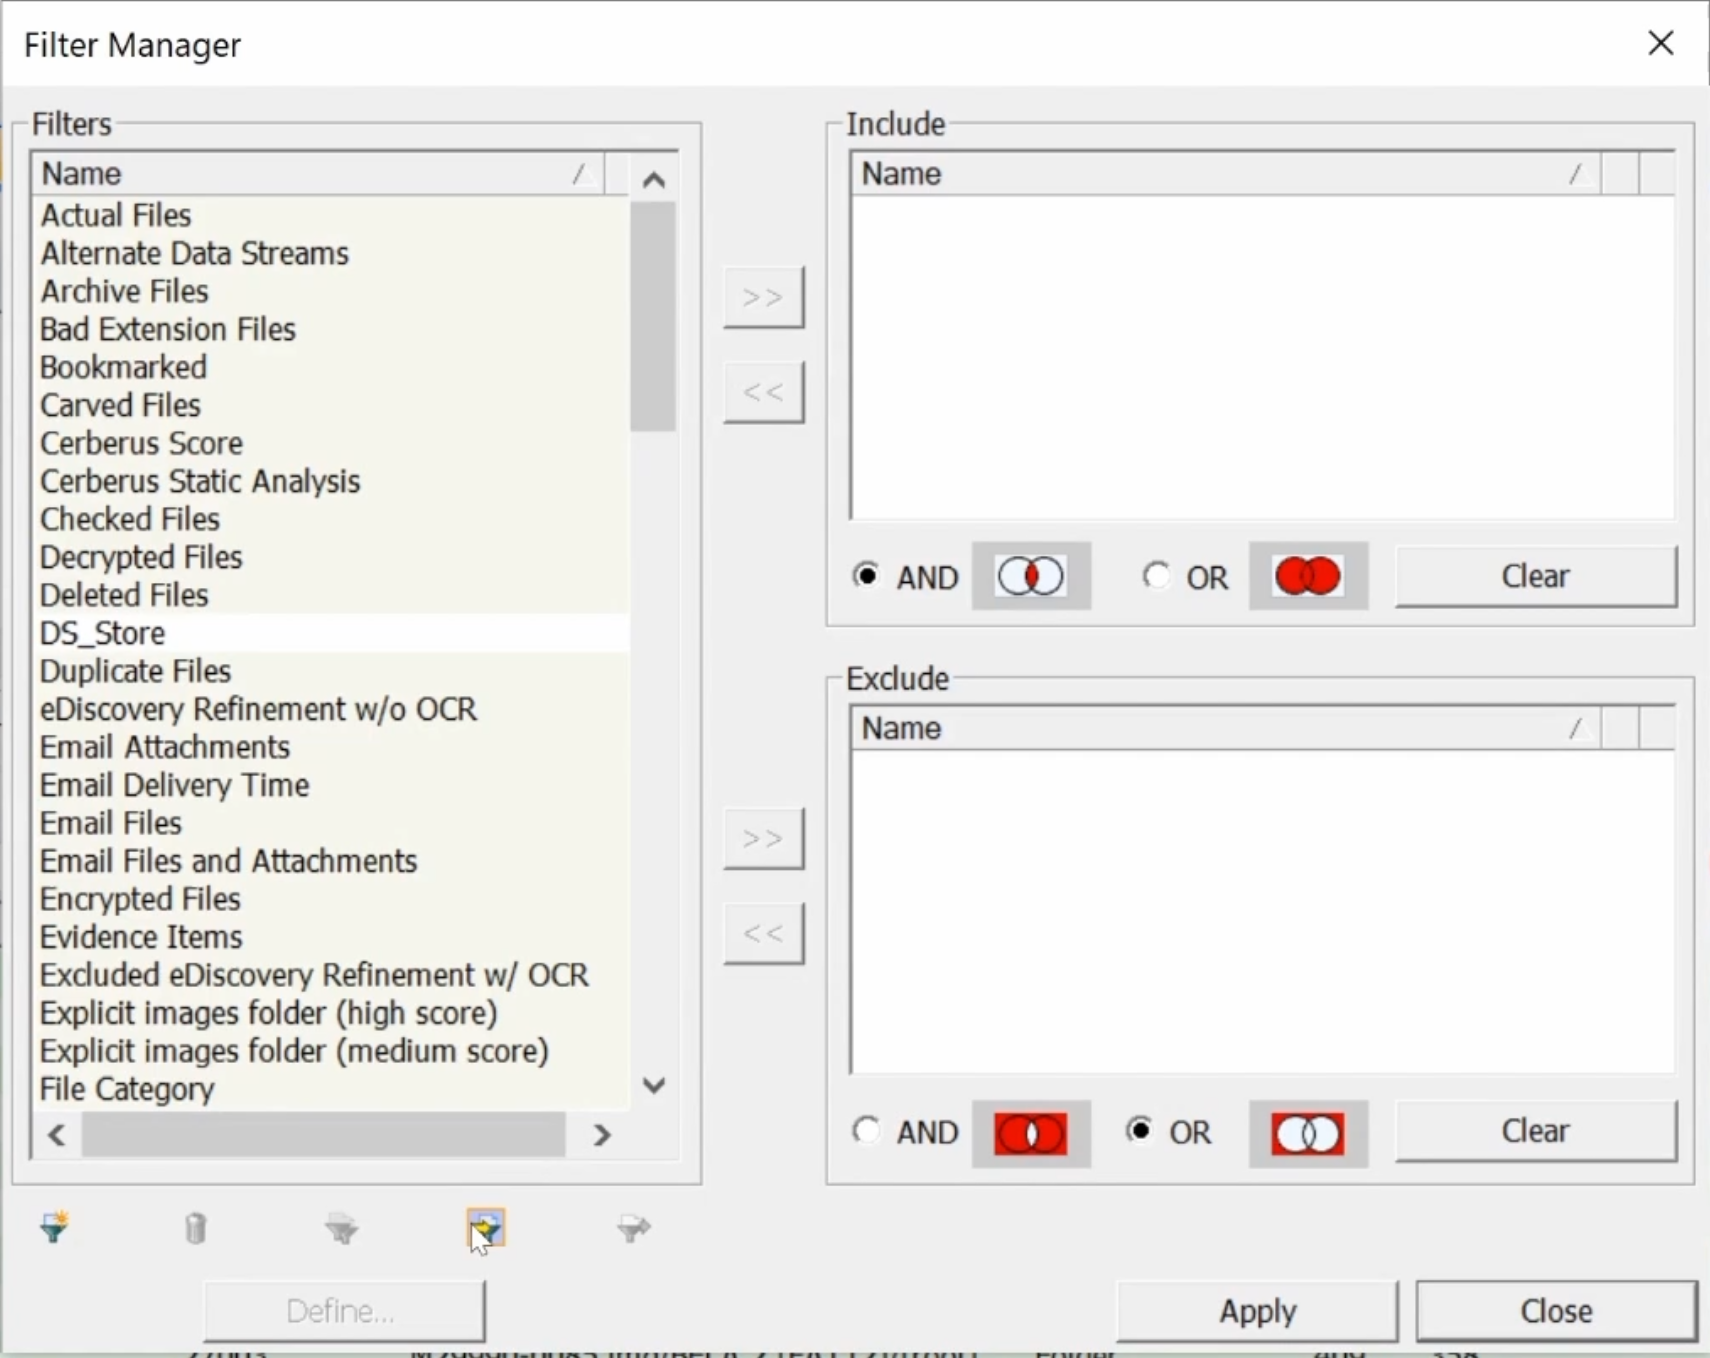 FTK Filter Manager window with filters listed on the left and funnel icons on bottom left.